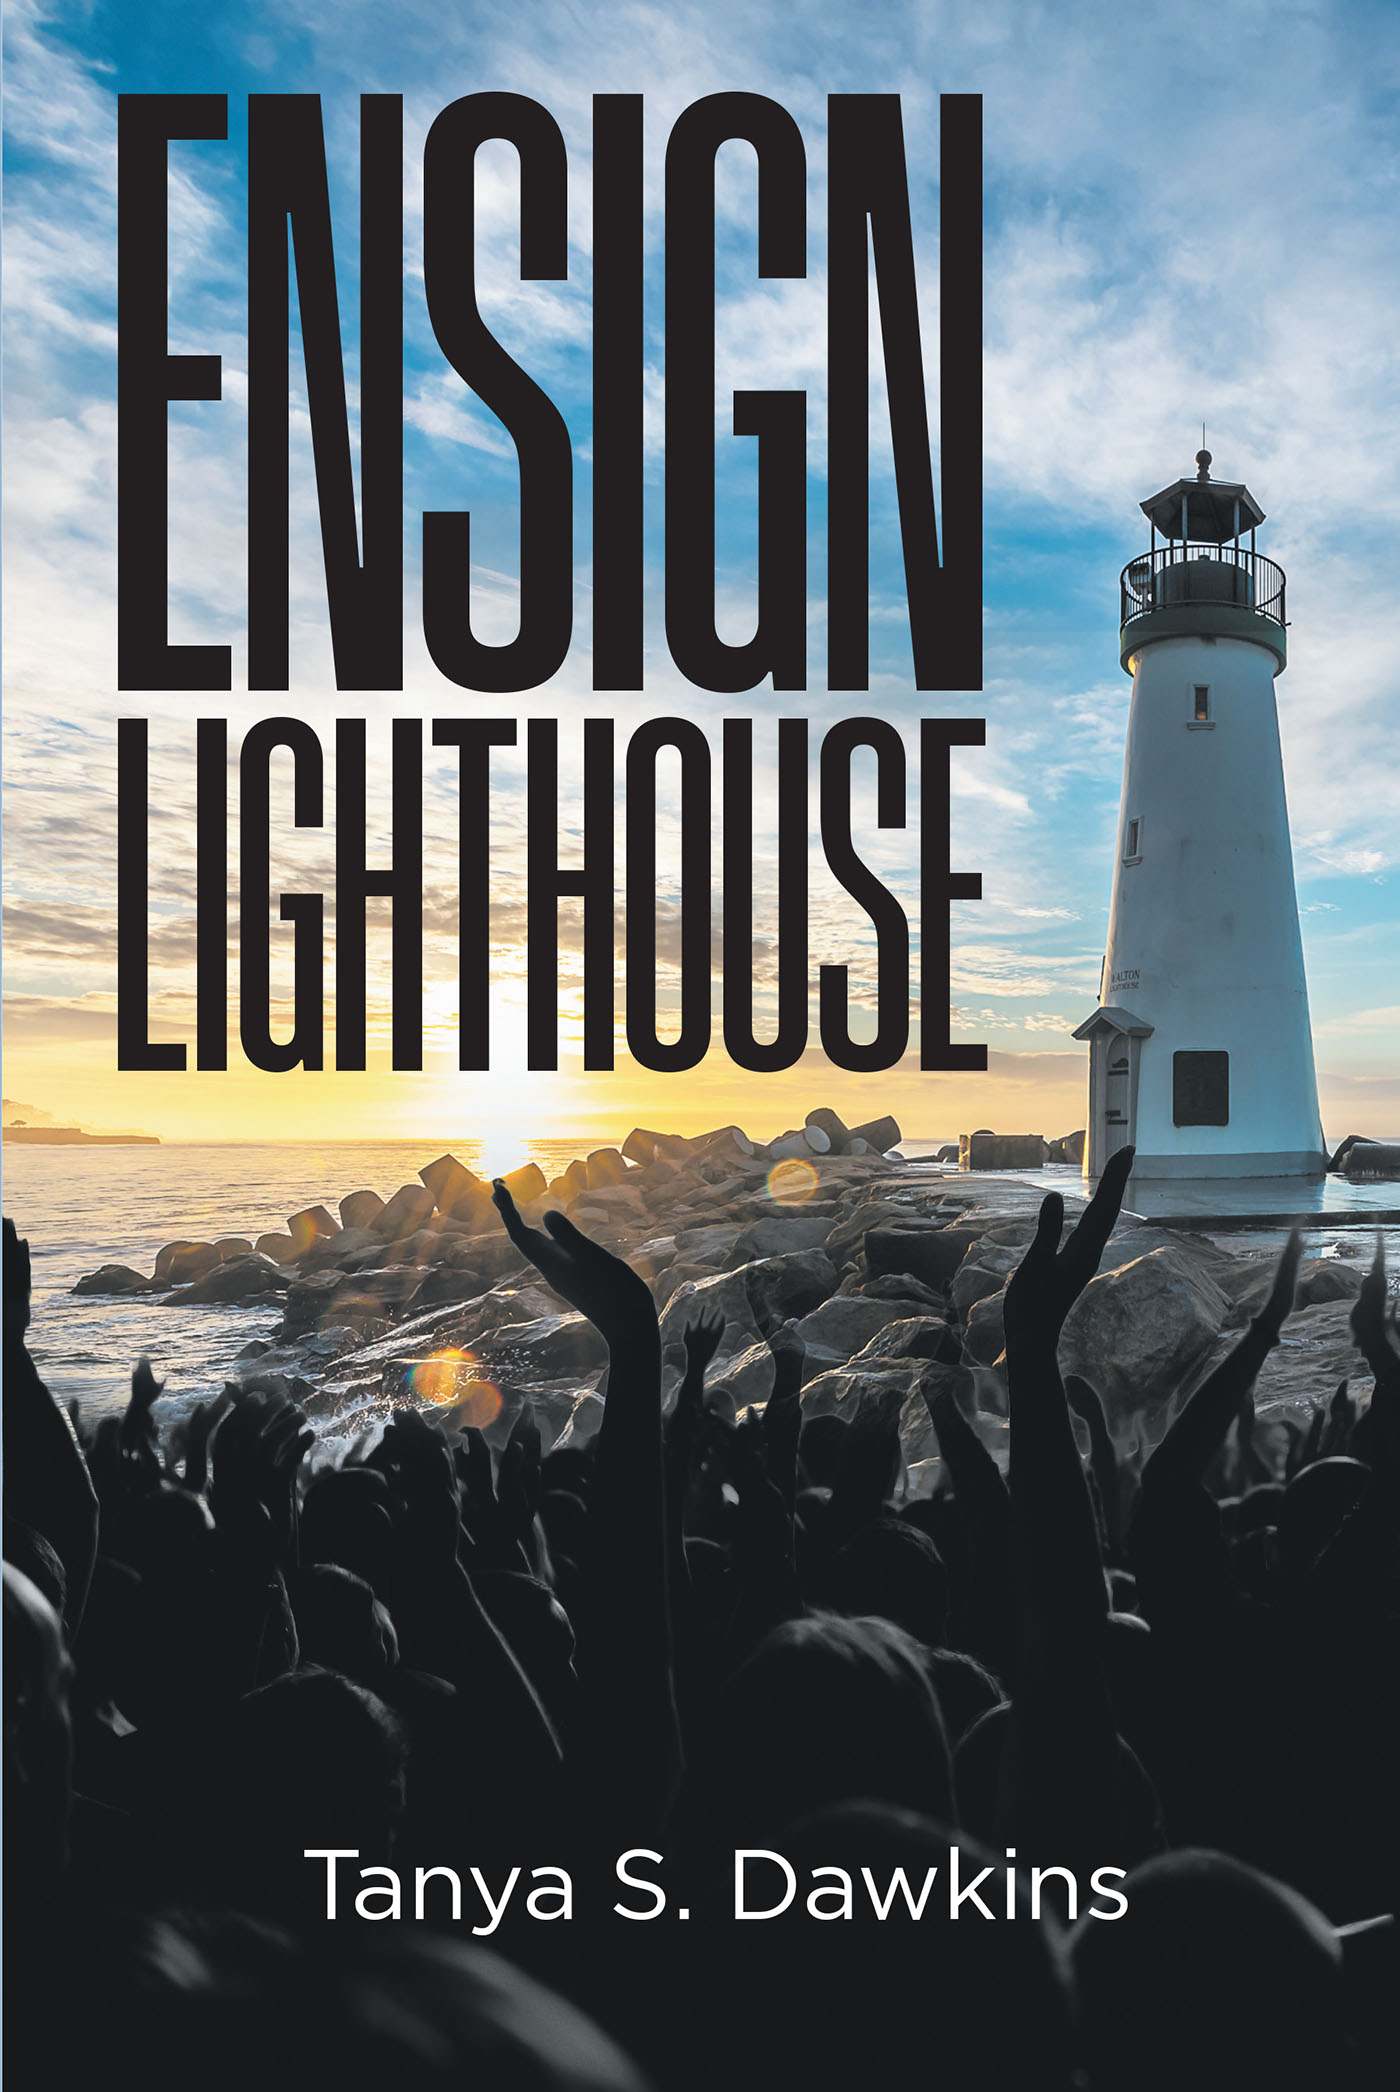 Author Tanya S. Dawkins’s New Book, "Ensign Lighthouse," is a Moving Devotional That Guides Readers in Deepening Their Connection to God